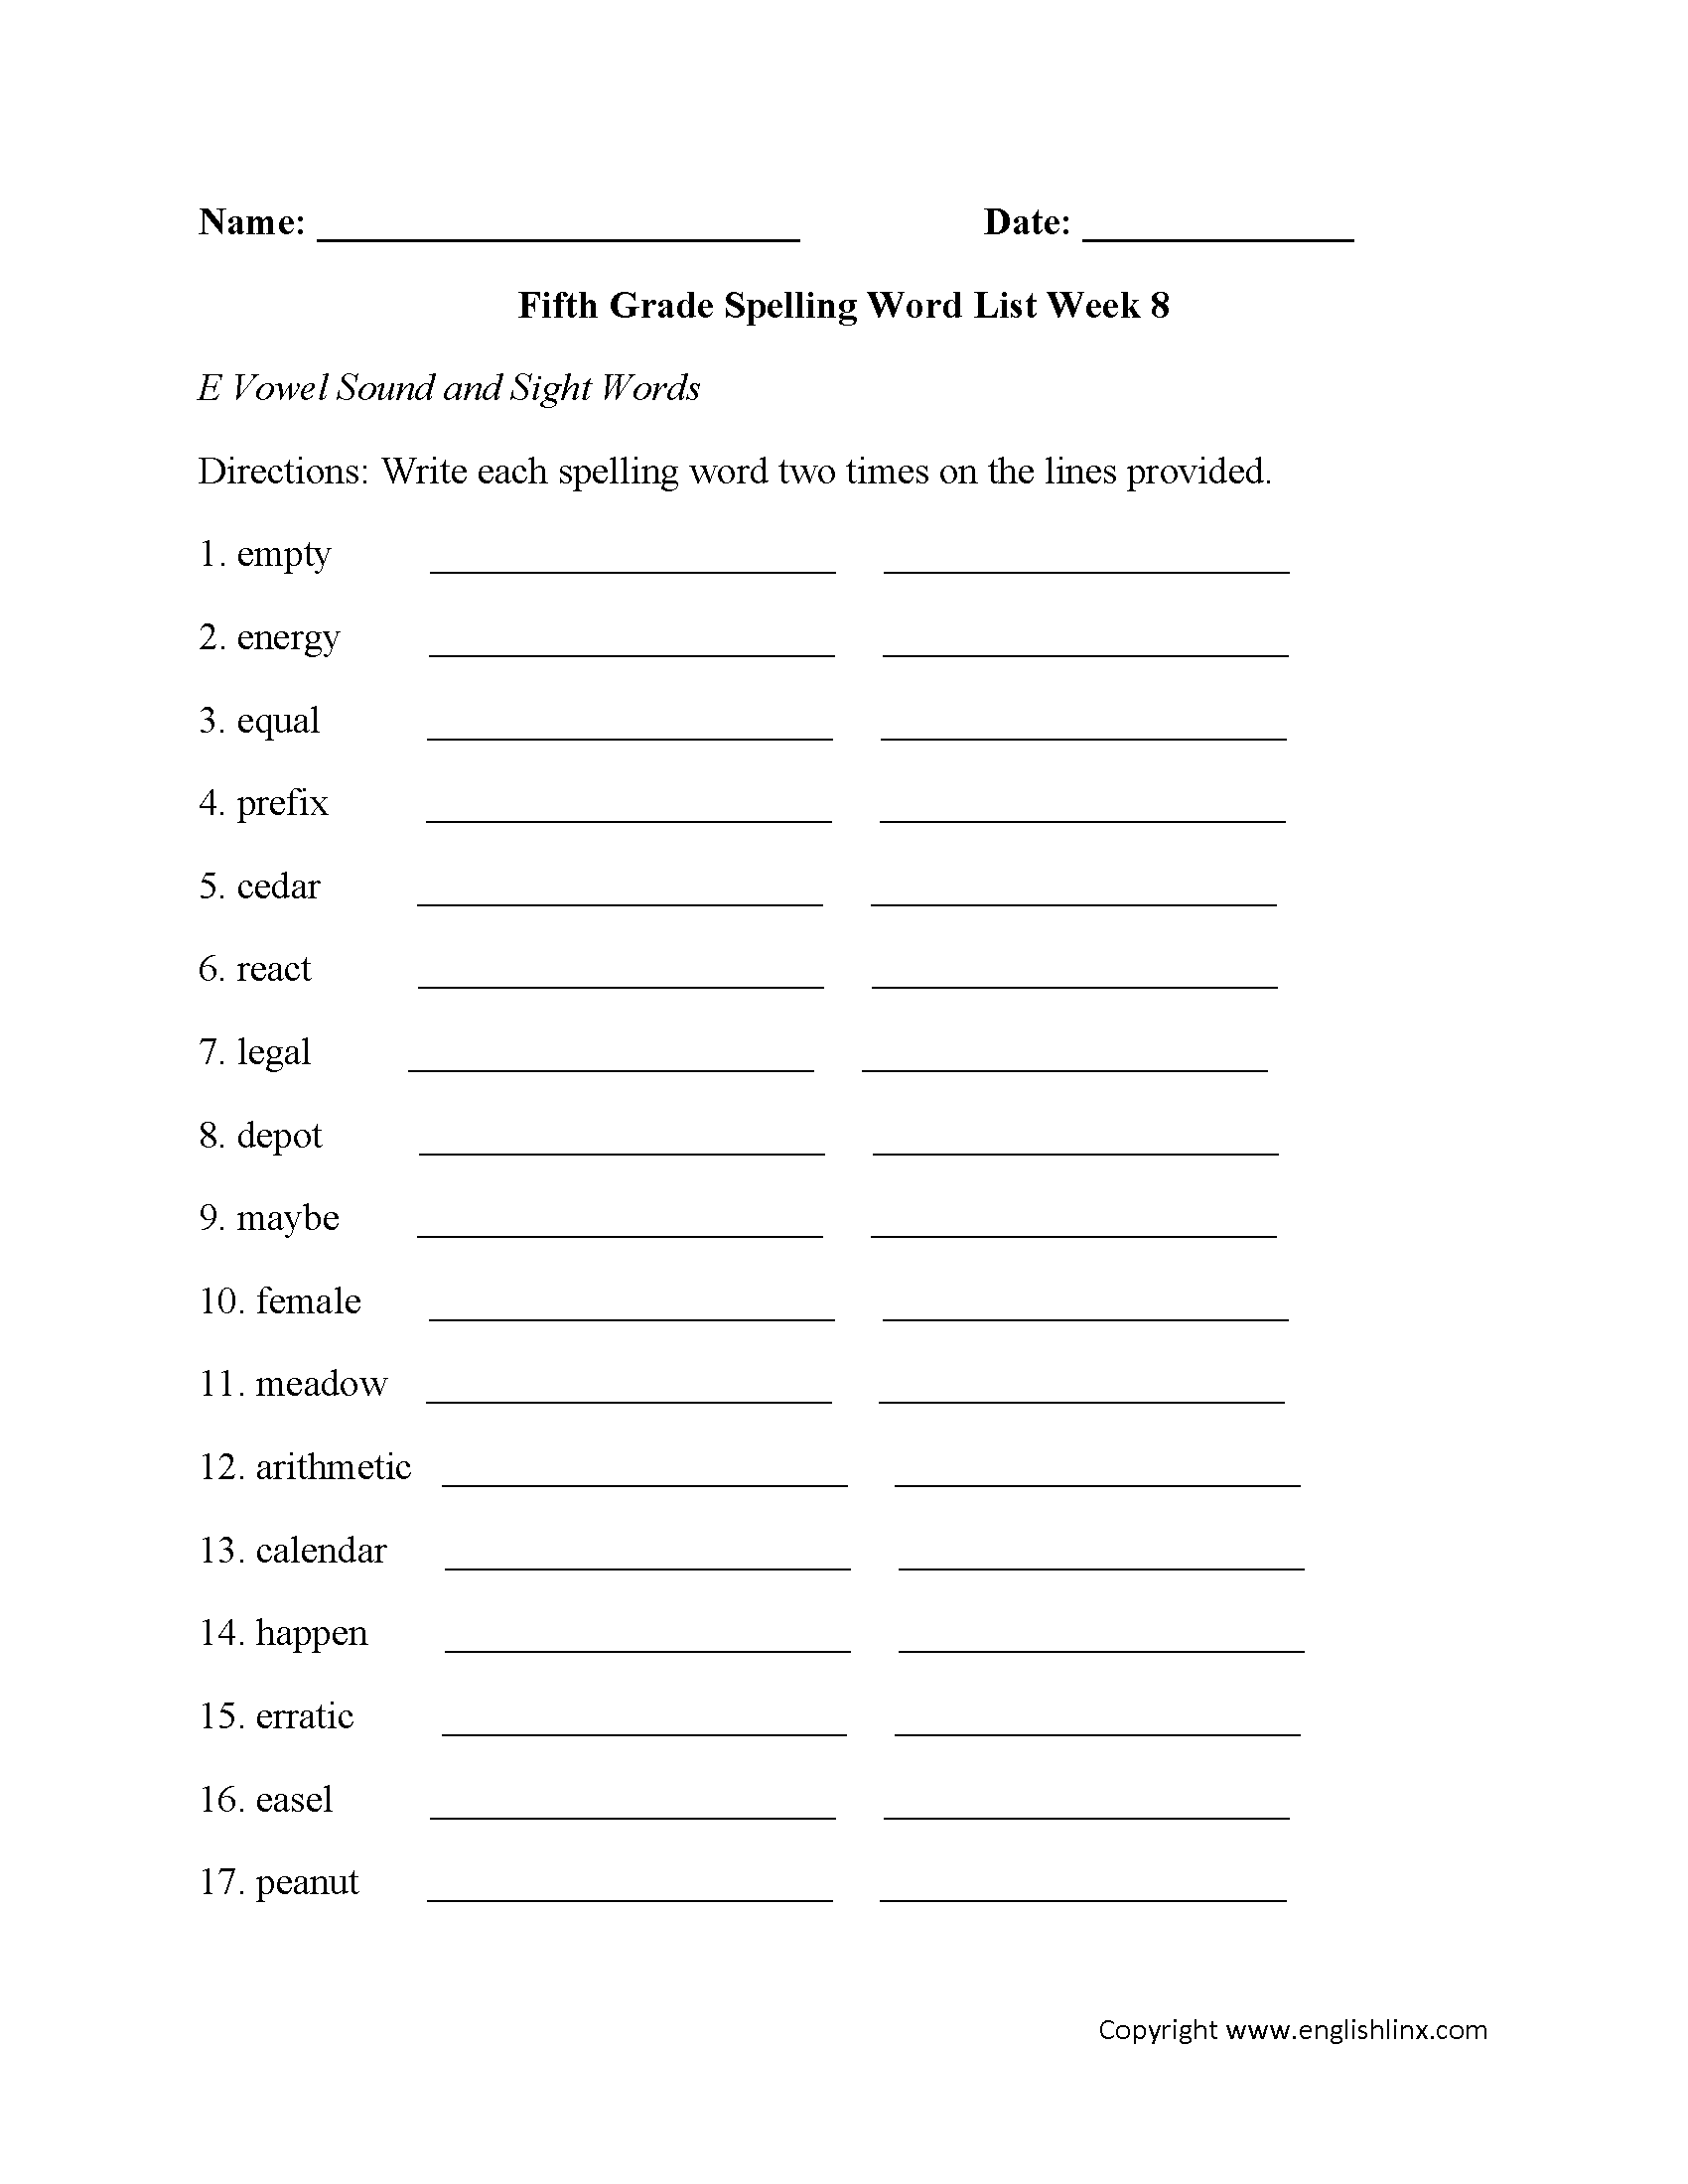 Week 8 E Vowel and Sight Words Fifth Grade Spelling Words Worksheets